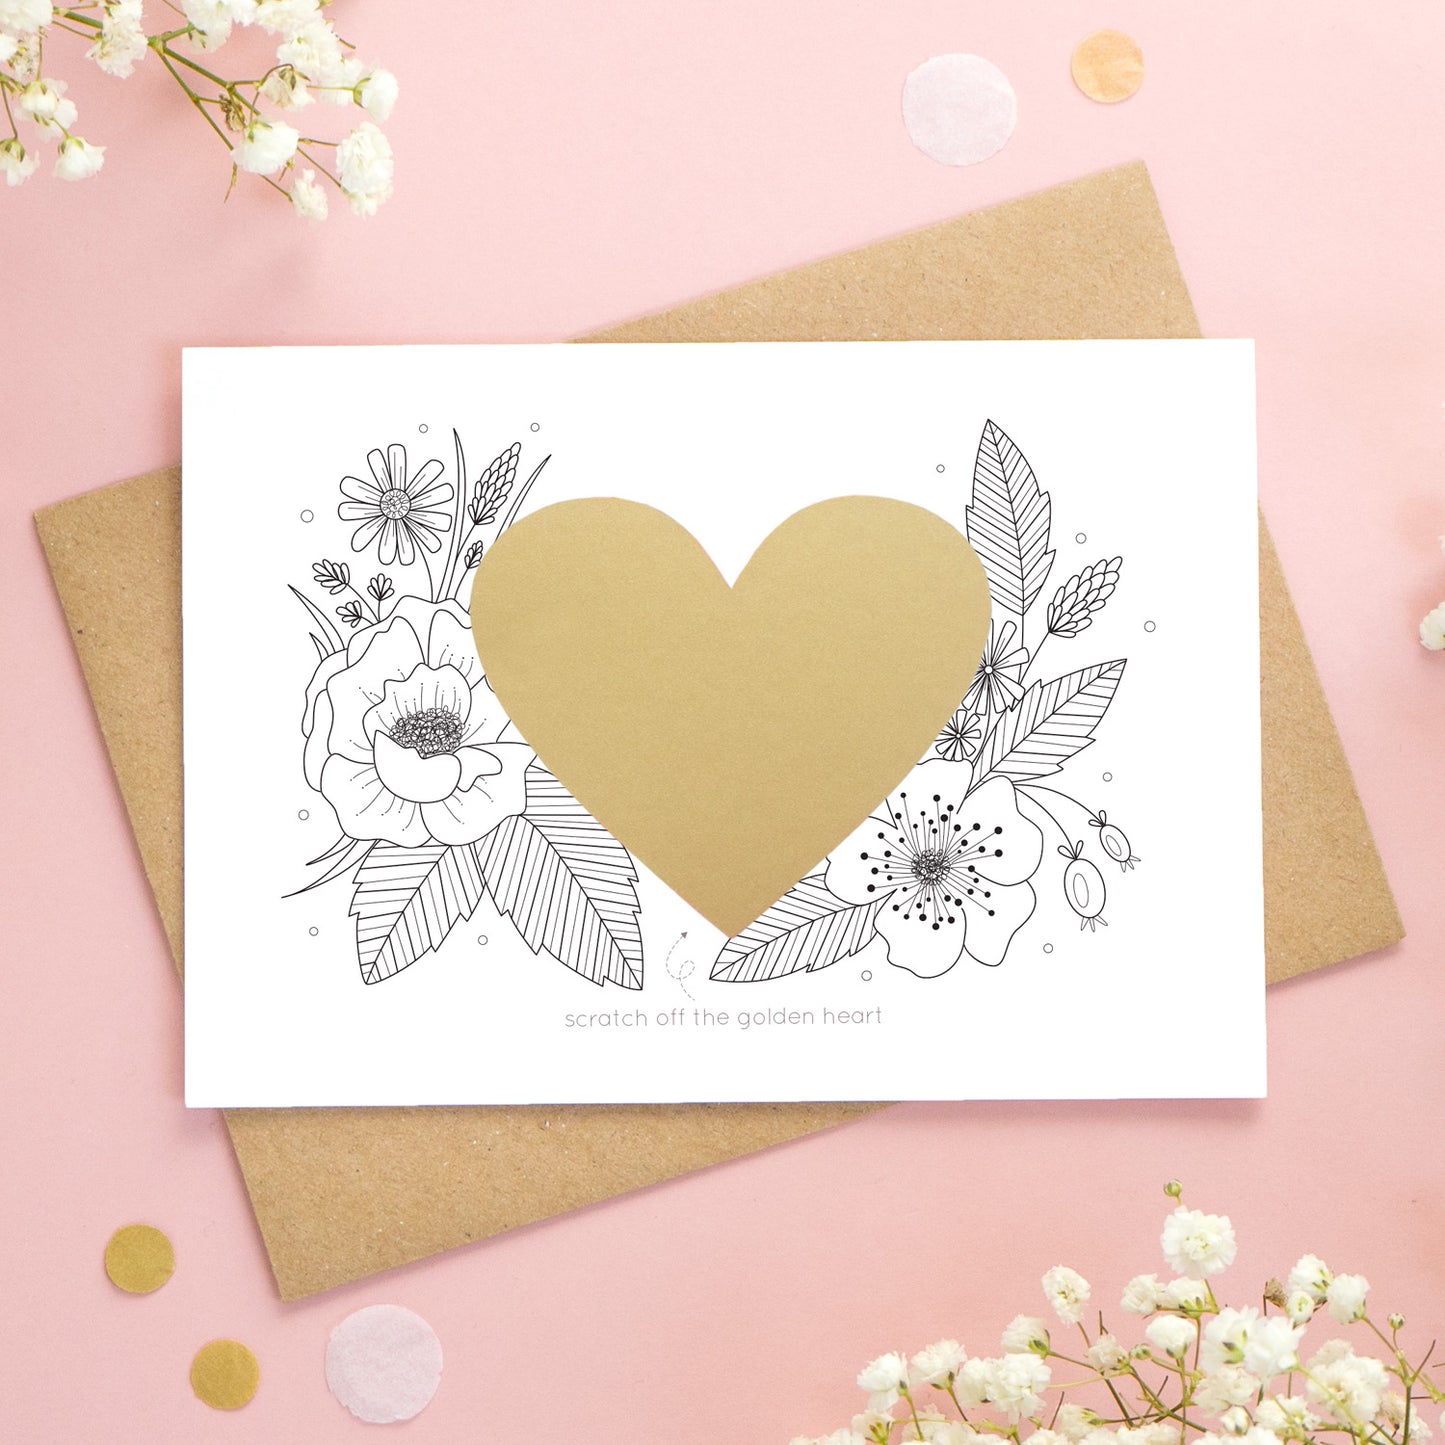 A personalised wedding scratch card shot on a pink background with white flowers. The golden heart is unscratched showing how the card will arrive.